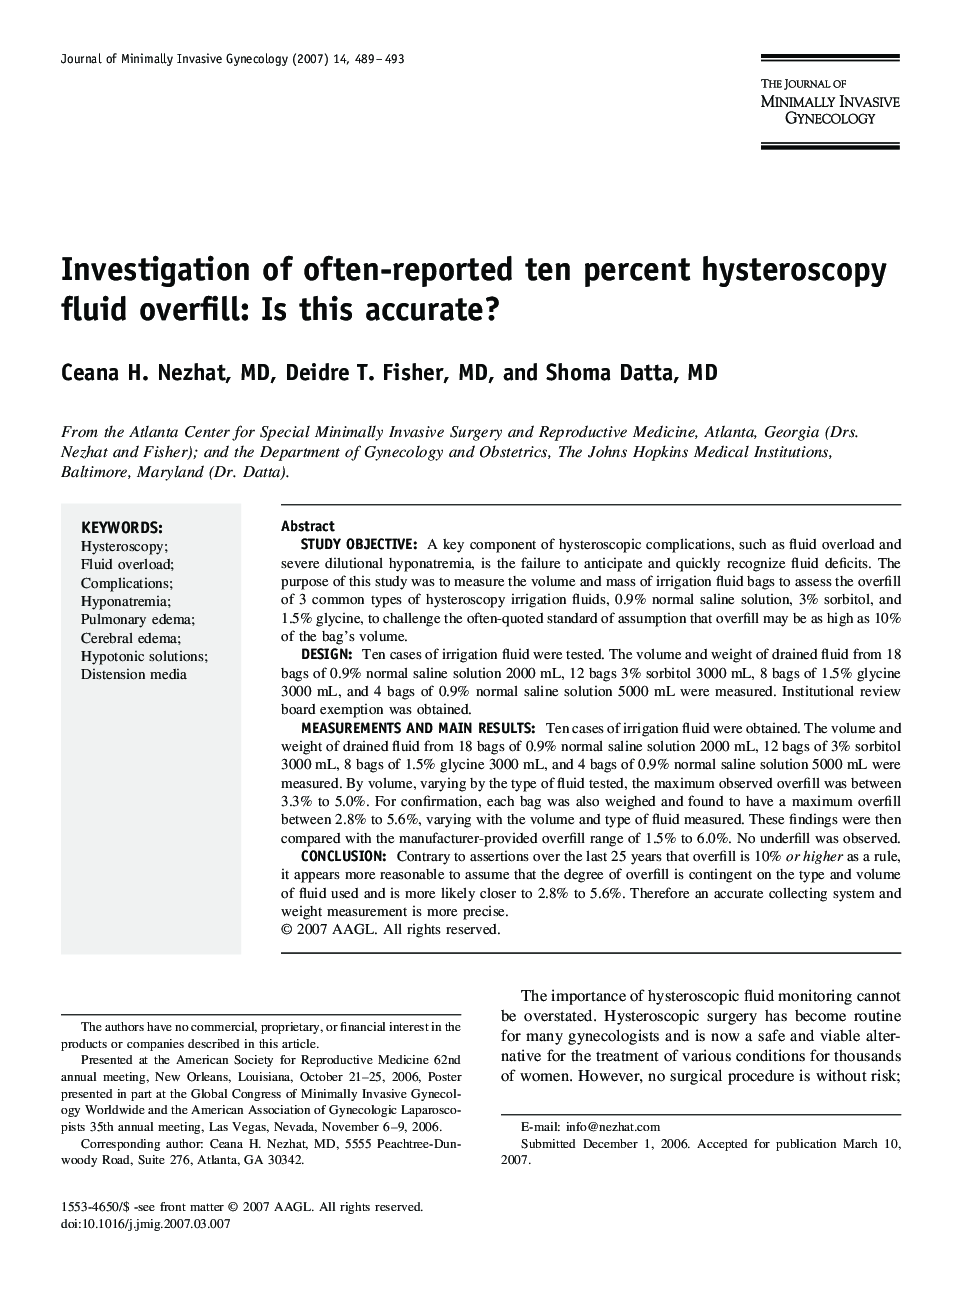 Investigation of often-reported ten percent hysteroscopy fluid overfill: Is this accurate? 